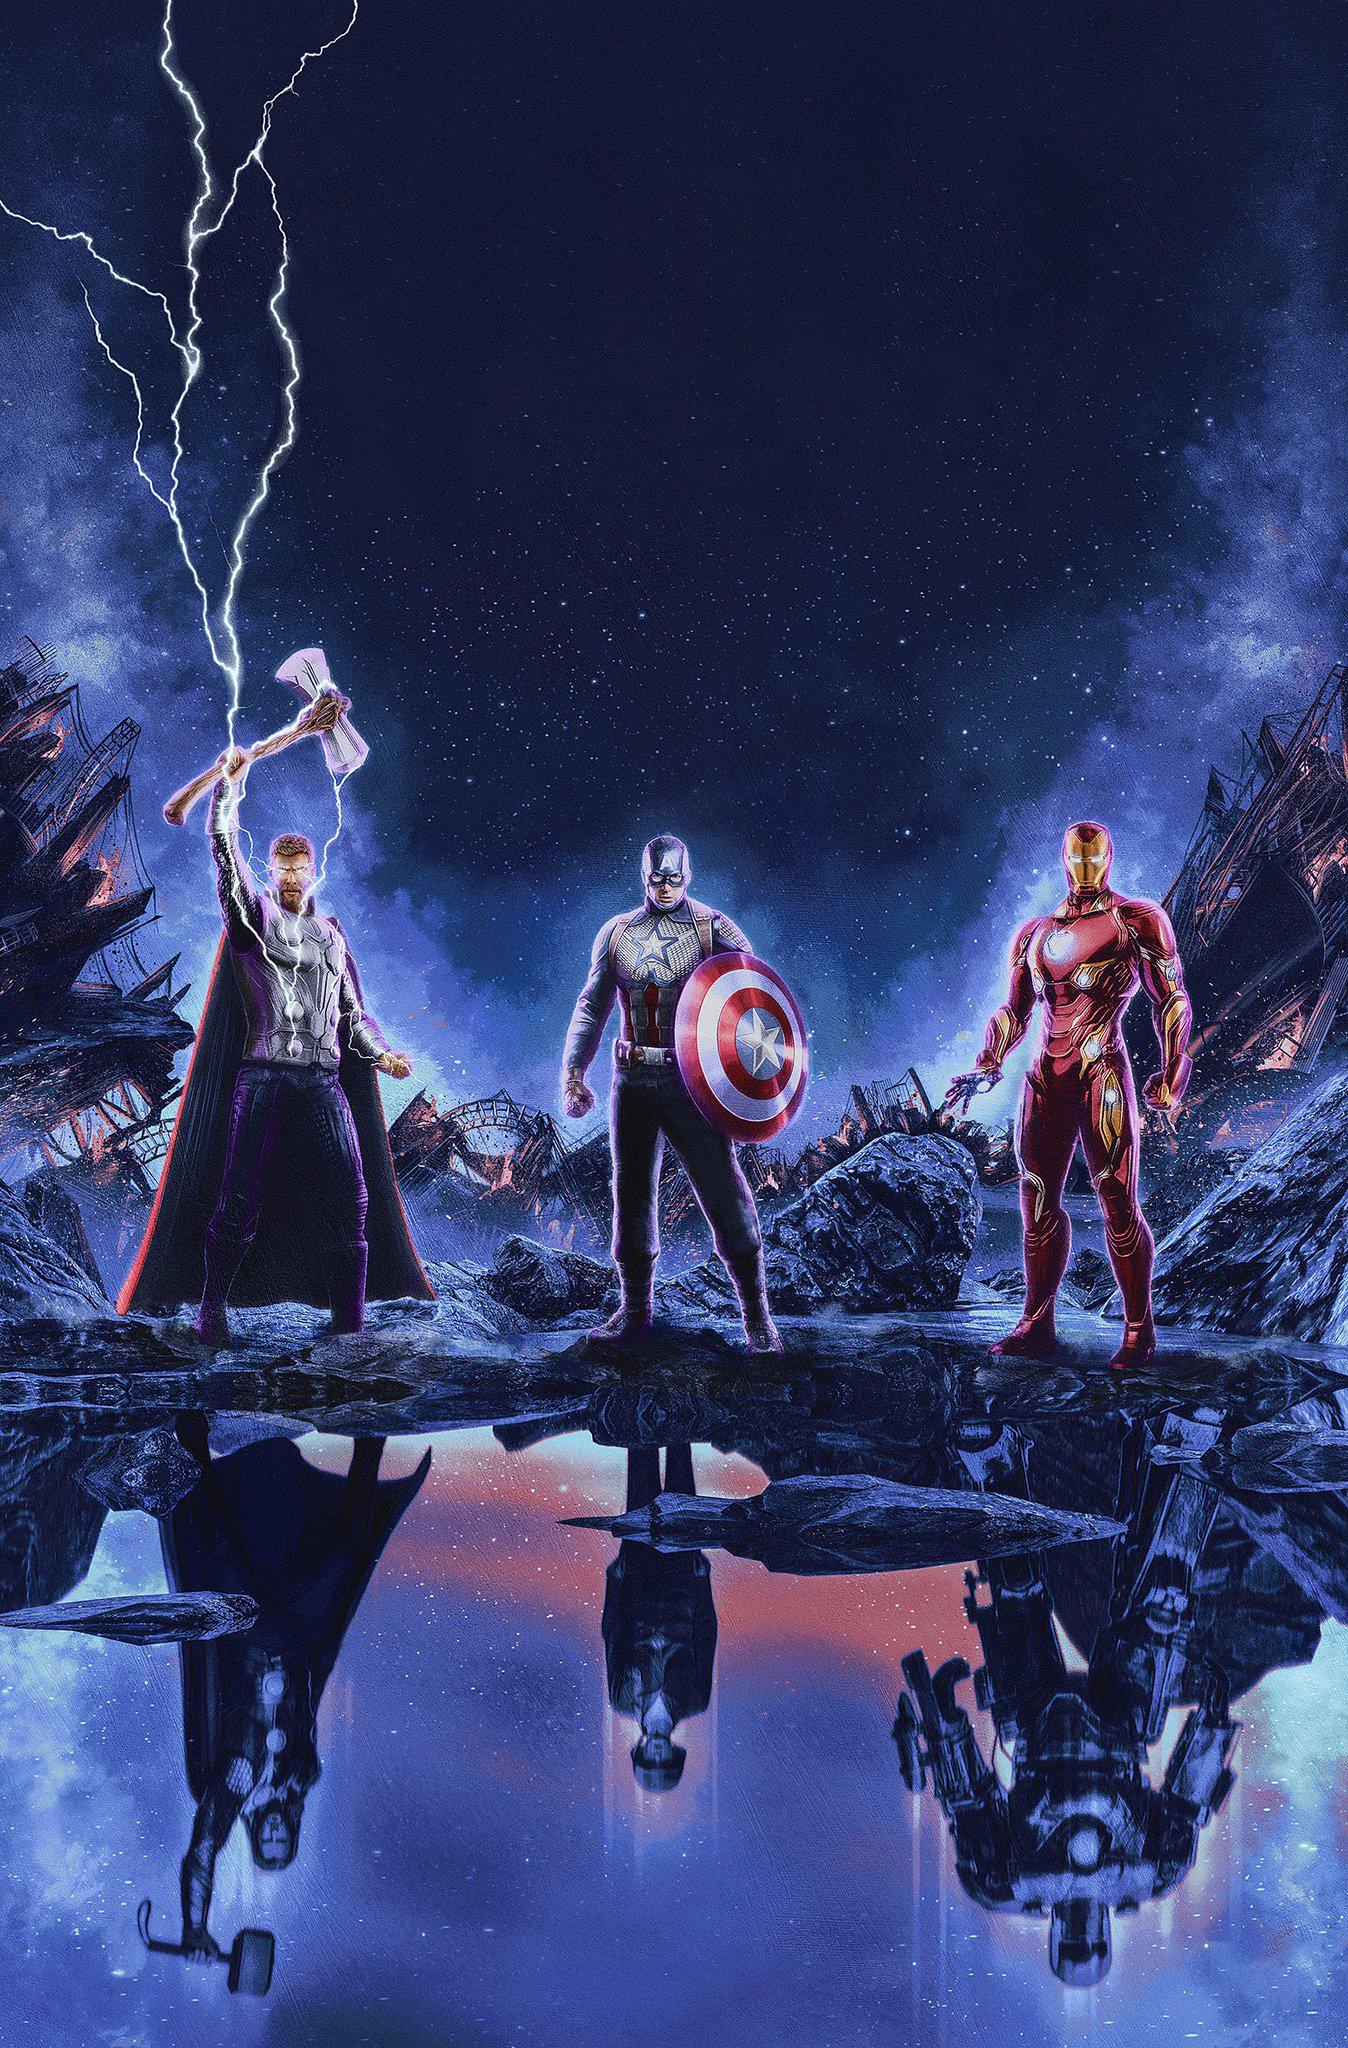 Textless Endgame Poster by SkinnerCreative + iPhone x wallpaper